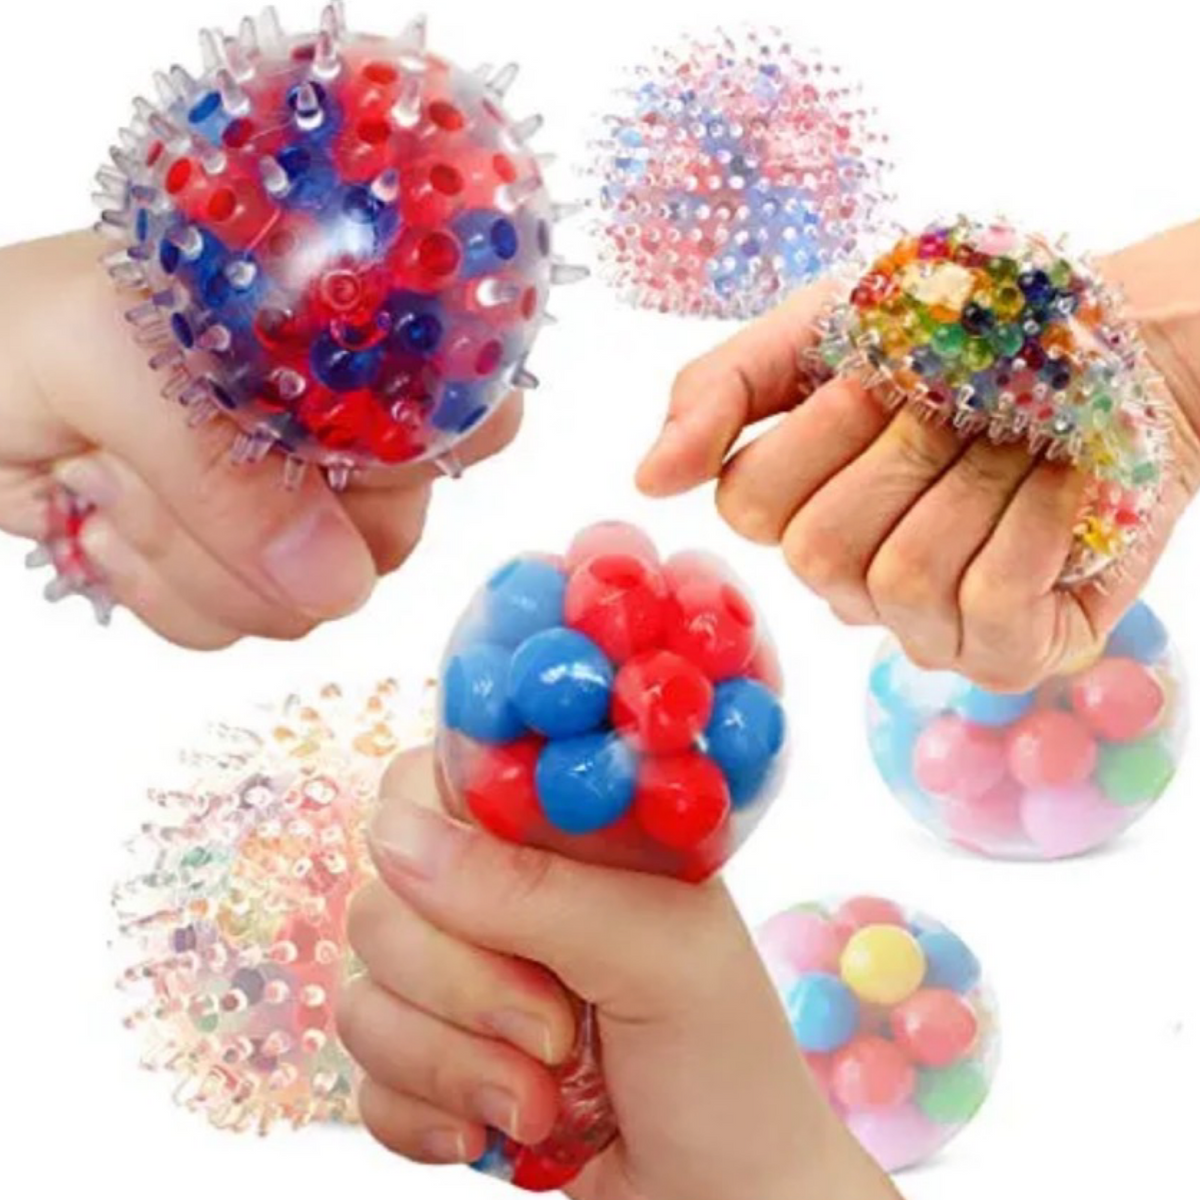 4pk of 2.5" Silicone Fidget Stress Release Balls - Hours Of Entertainment!